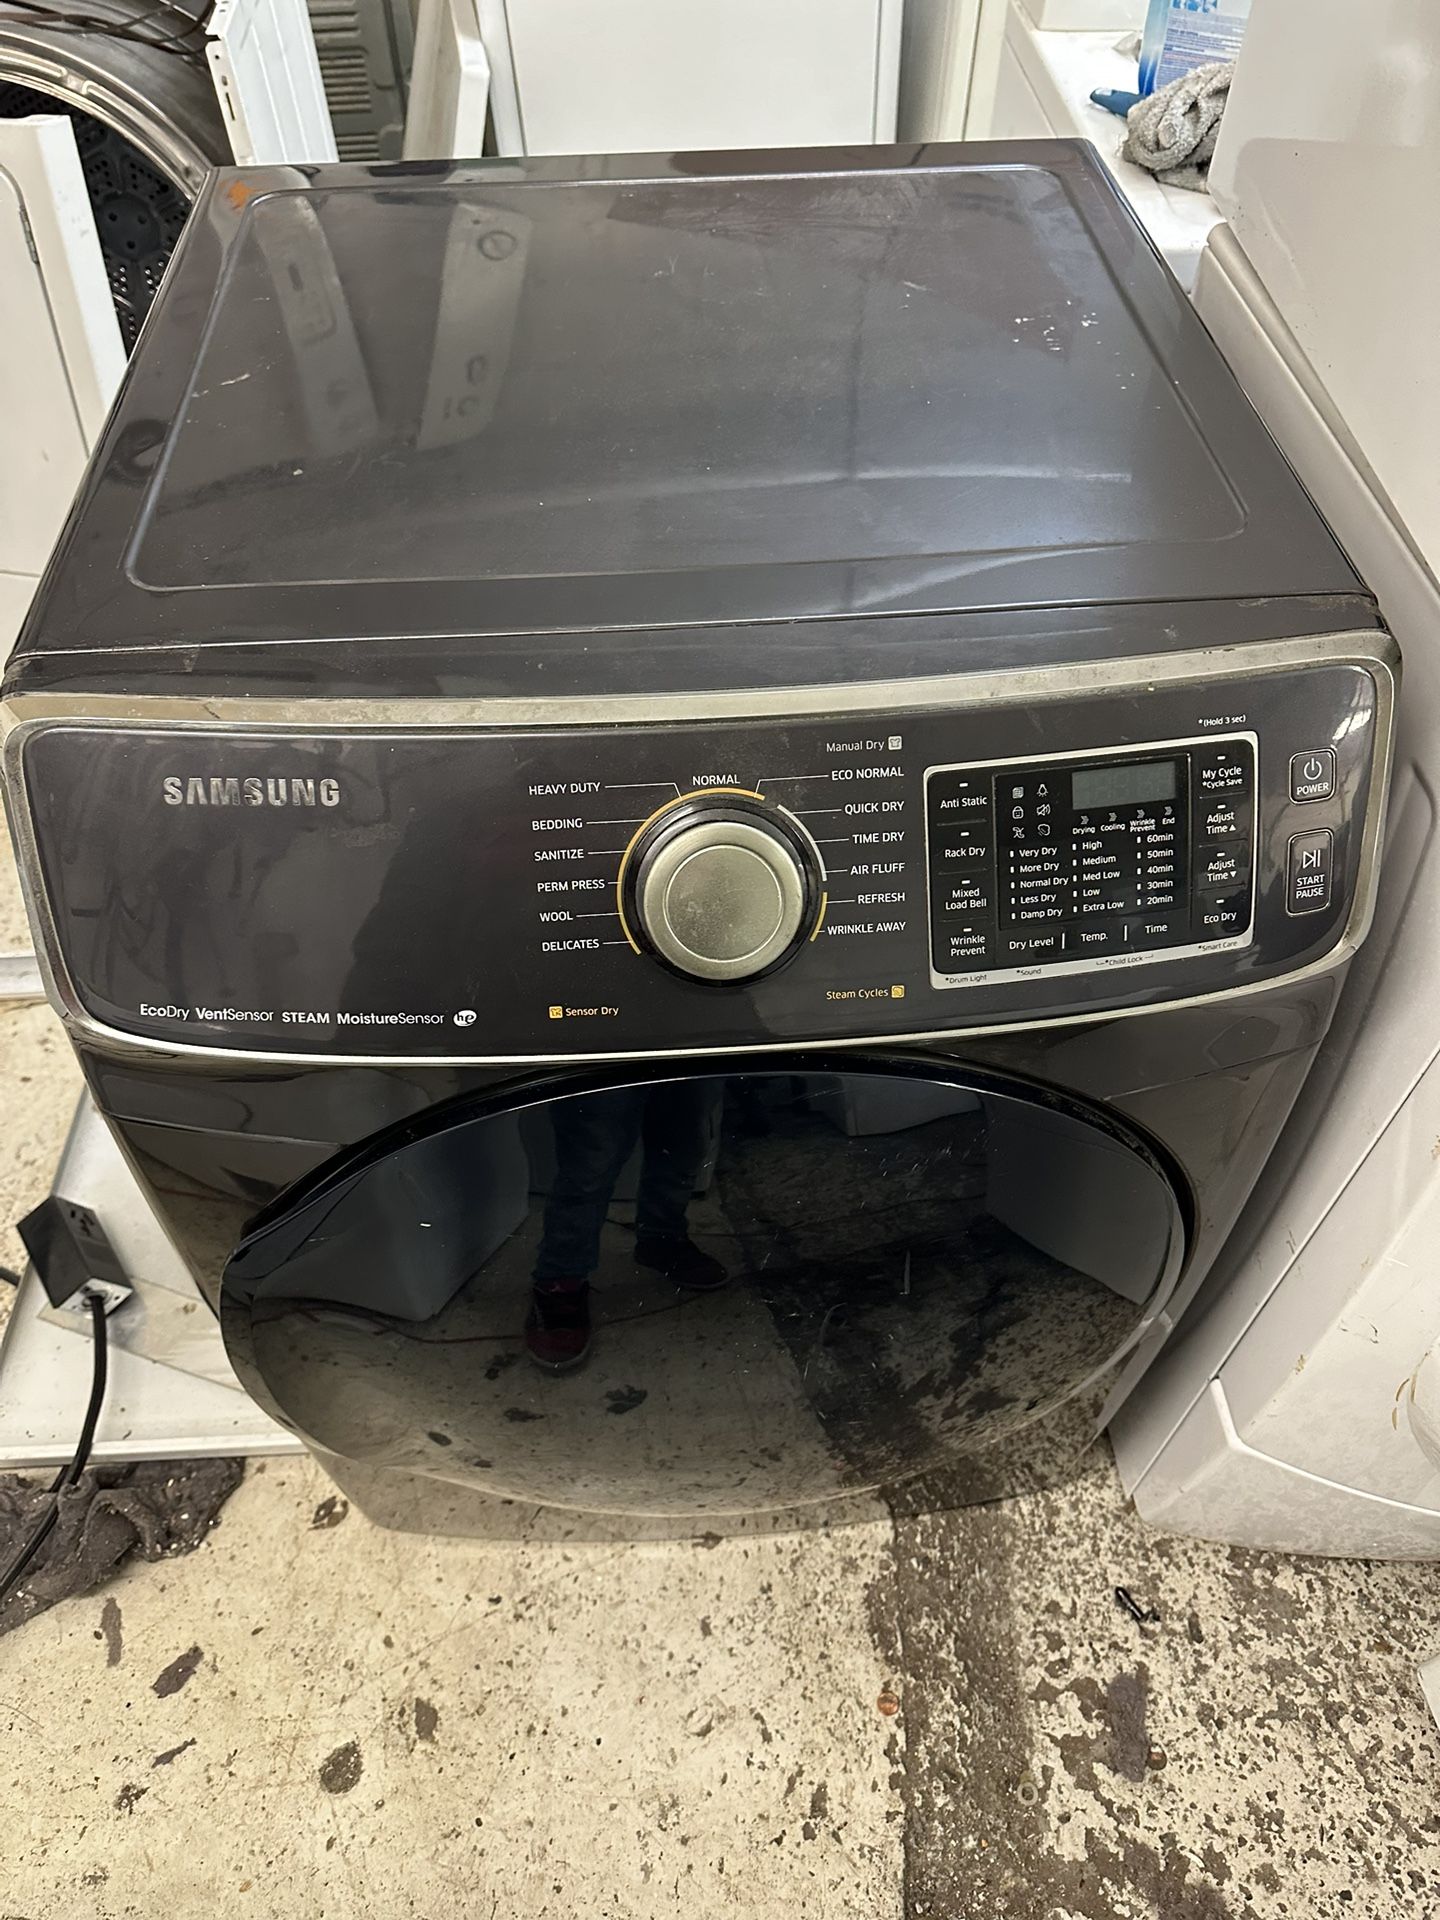 Samsung electric dryer available in excellent working condition warranty iplushop we deliver